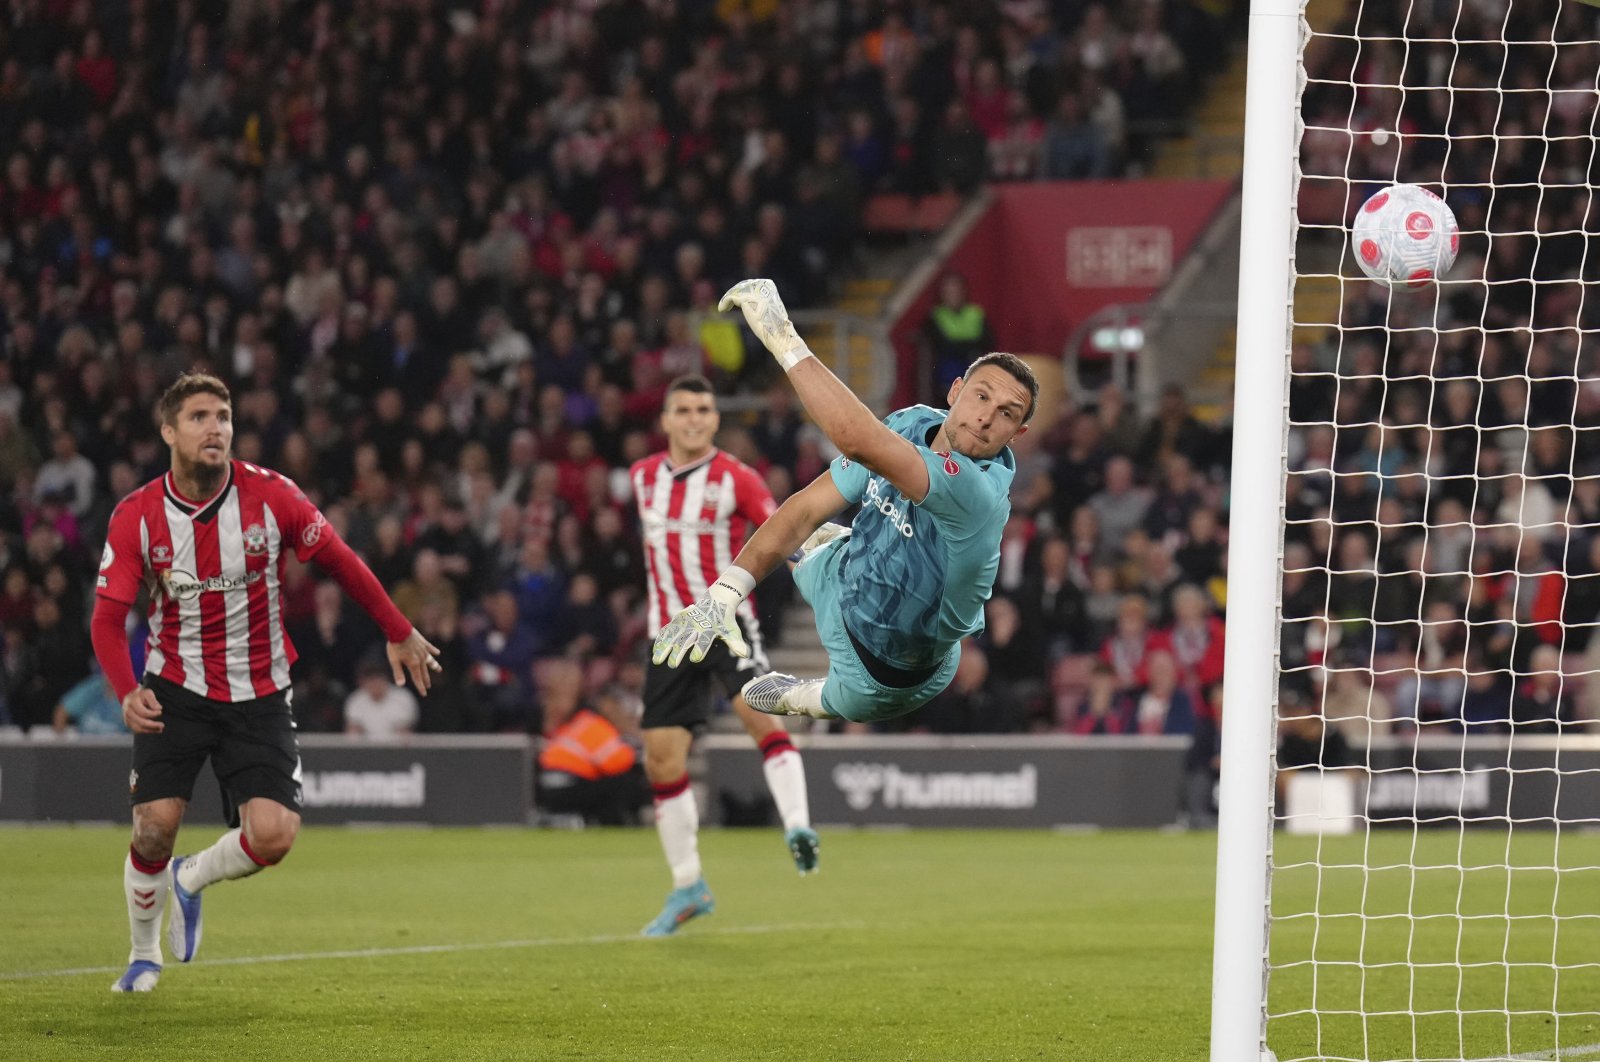 Southampton goalkeeper Alex McCarthy fails to stop a goal by Liverpool&#039;s Joel Matip (not pictured) during a Premier League football match at St. Mary&#039;s Stadium, Southampton, England, May 17, 2022. (AP Photo)